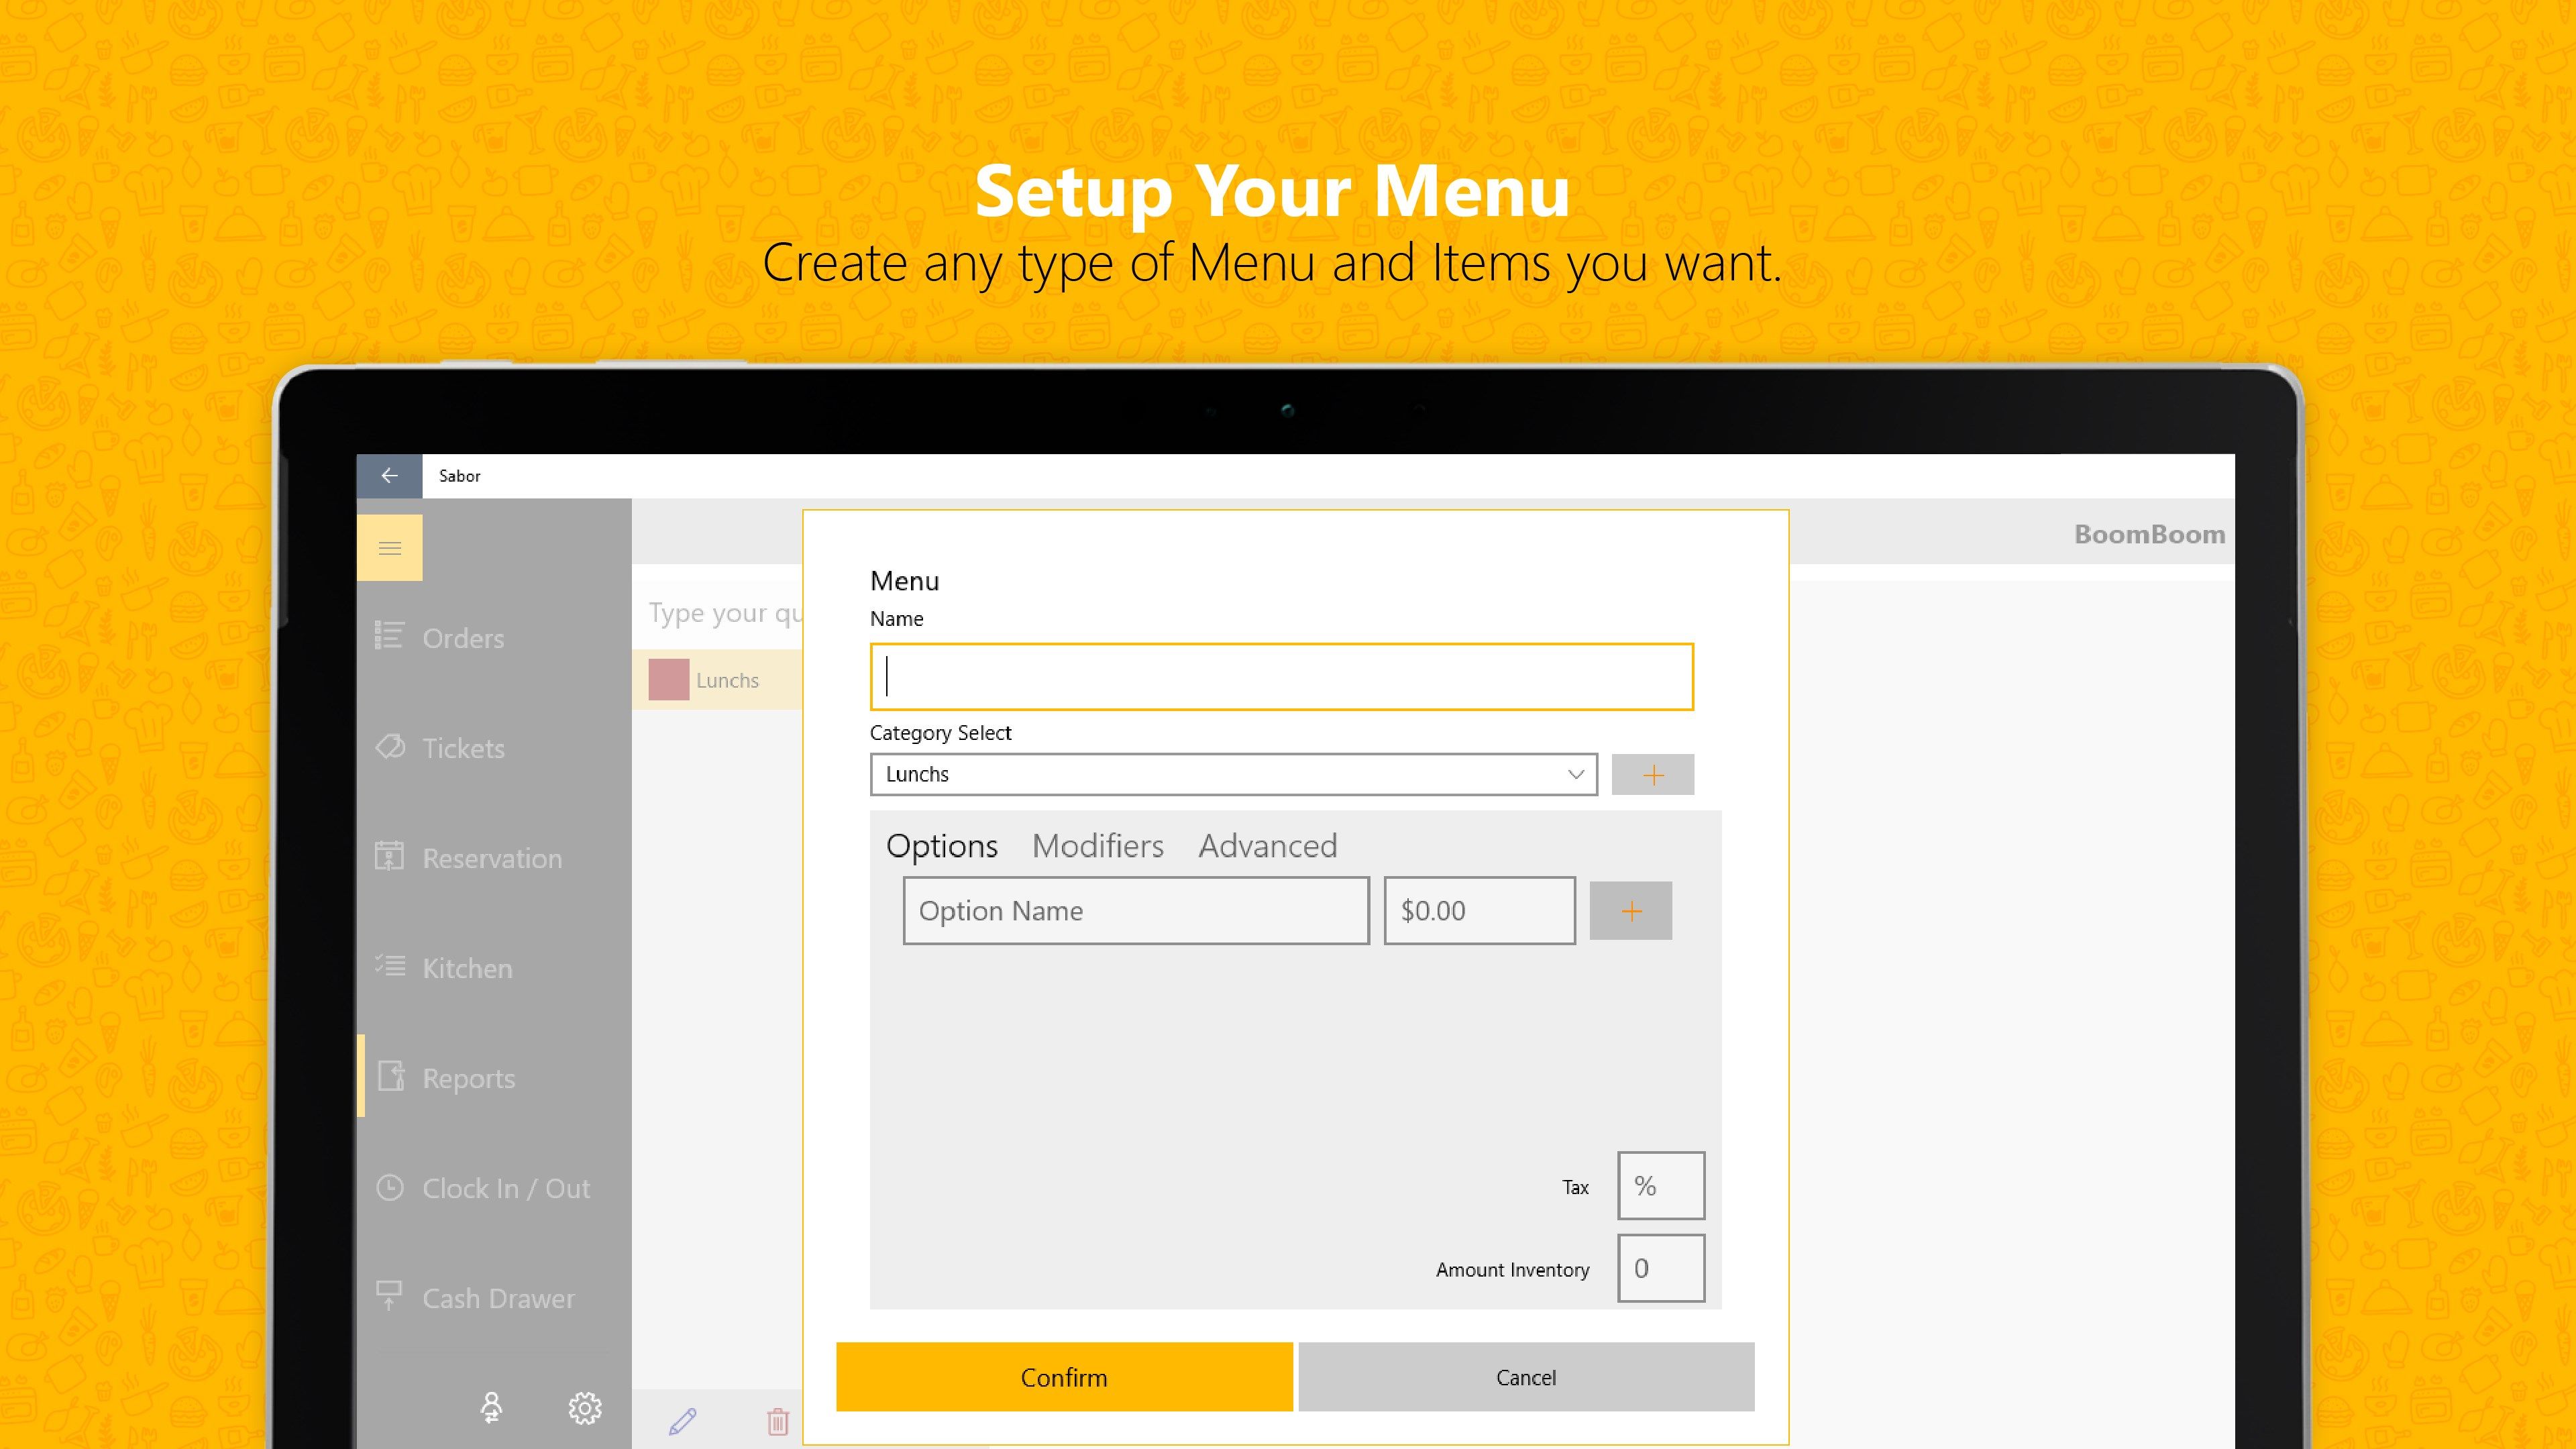 Add your menu and setup categories, options, and modifiers